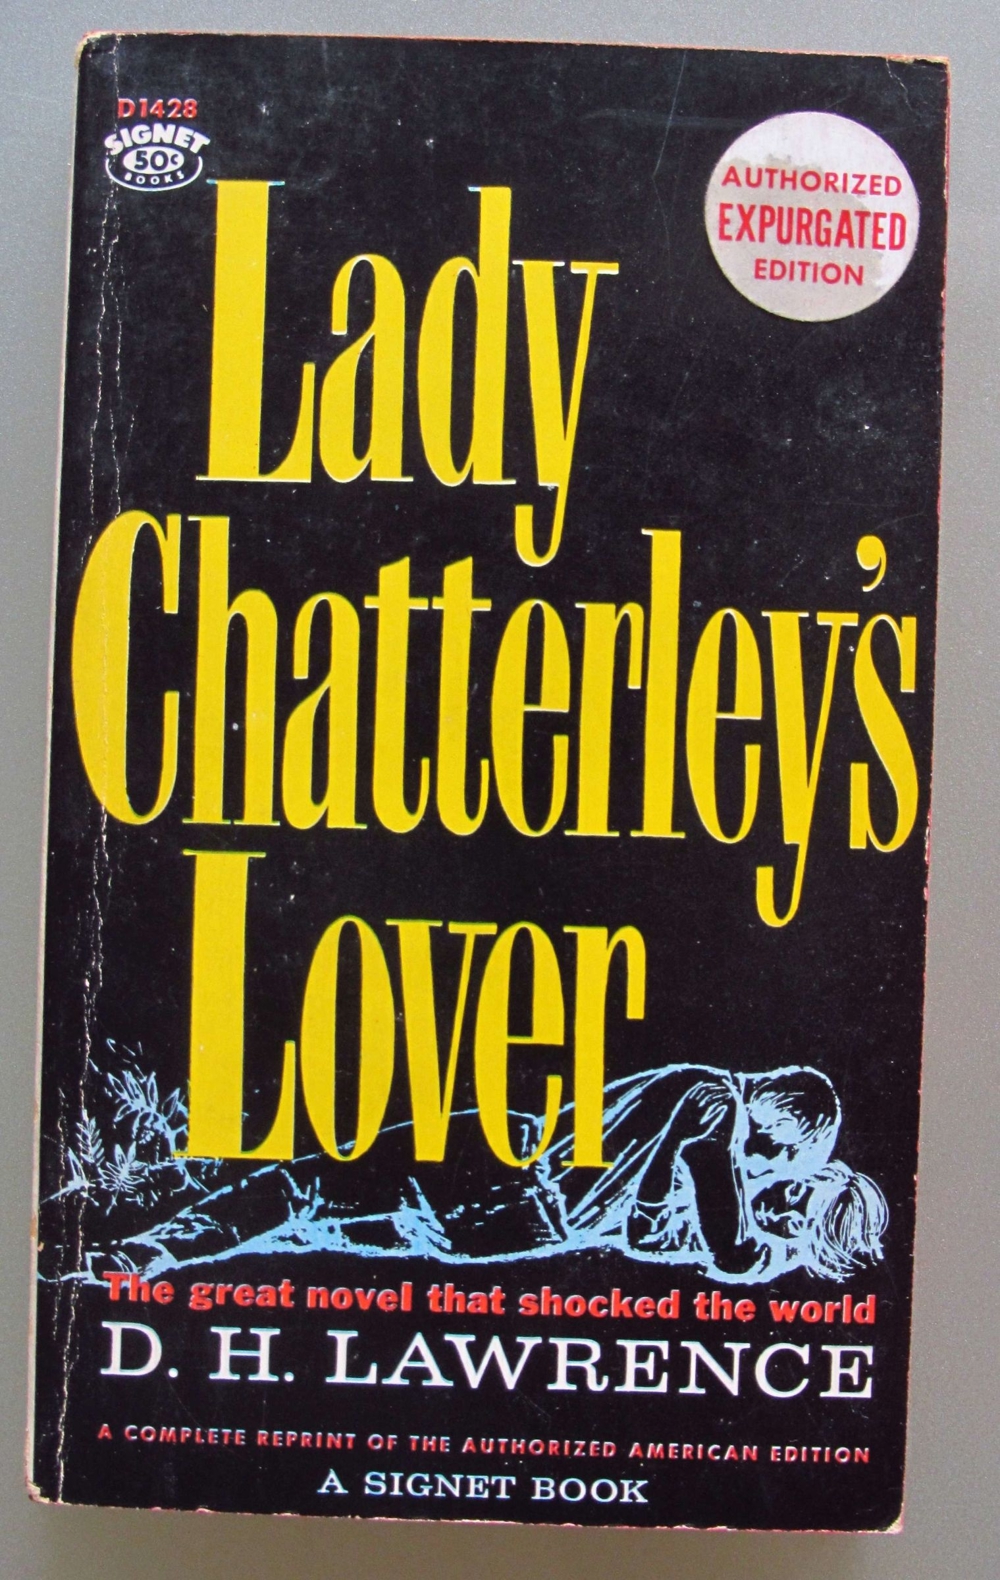 D.H. Lawrence: Lady Chatterly``s Lover (engl., 1959)